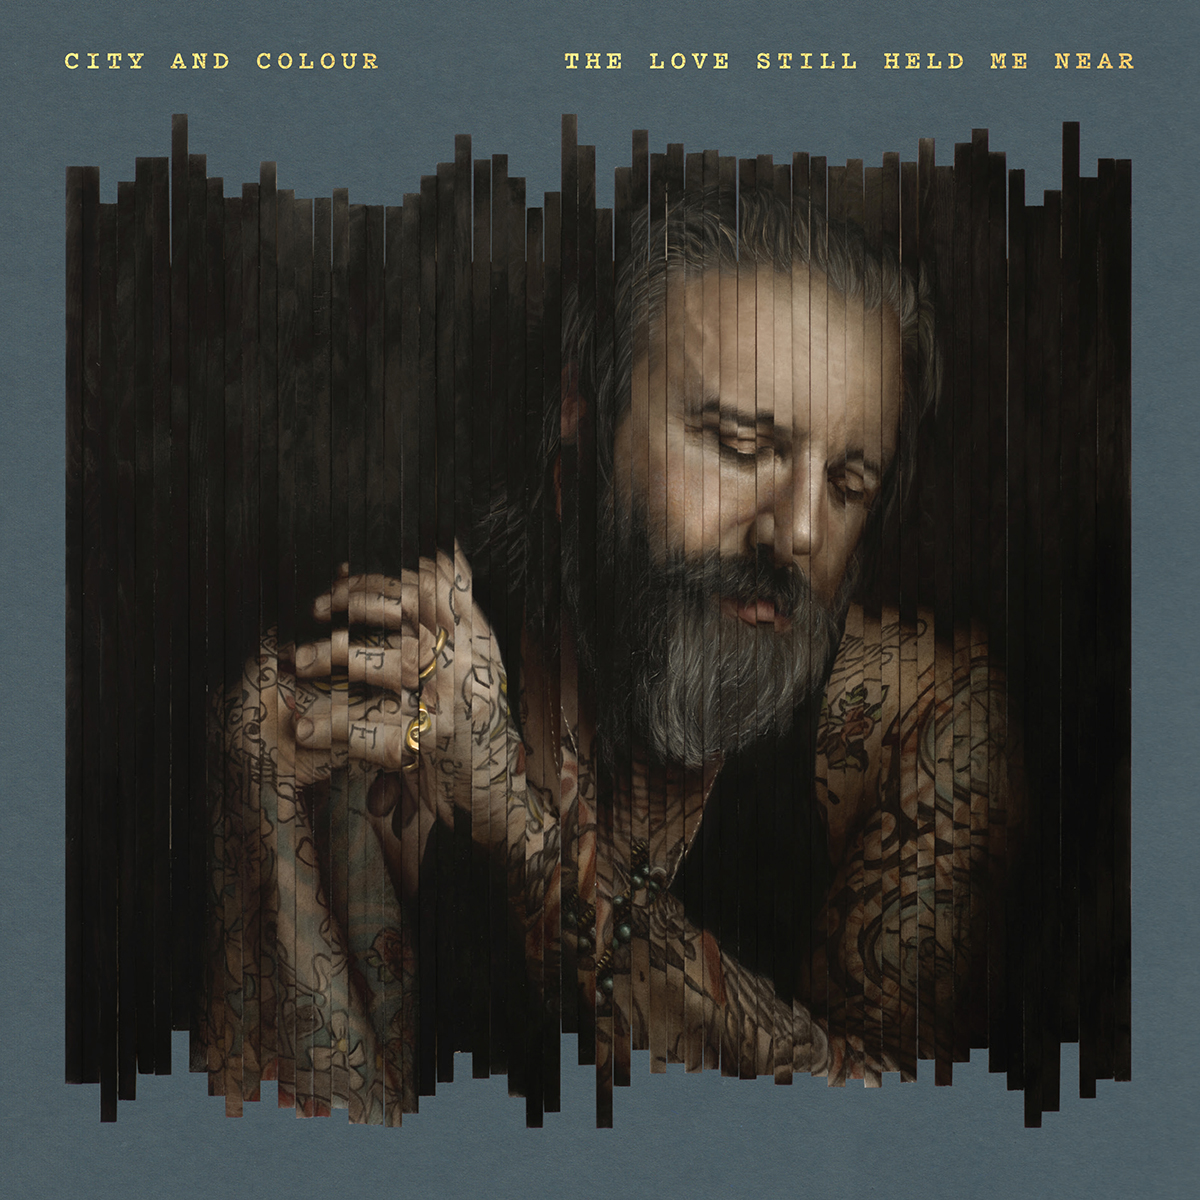 City and Colour Announces New LP ‘The Love Still Held Me Near’ Out March 31